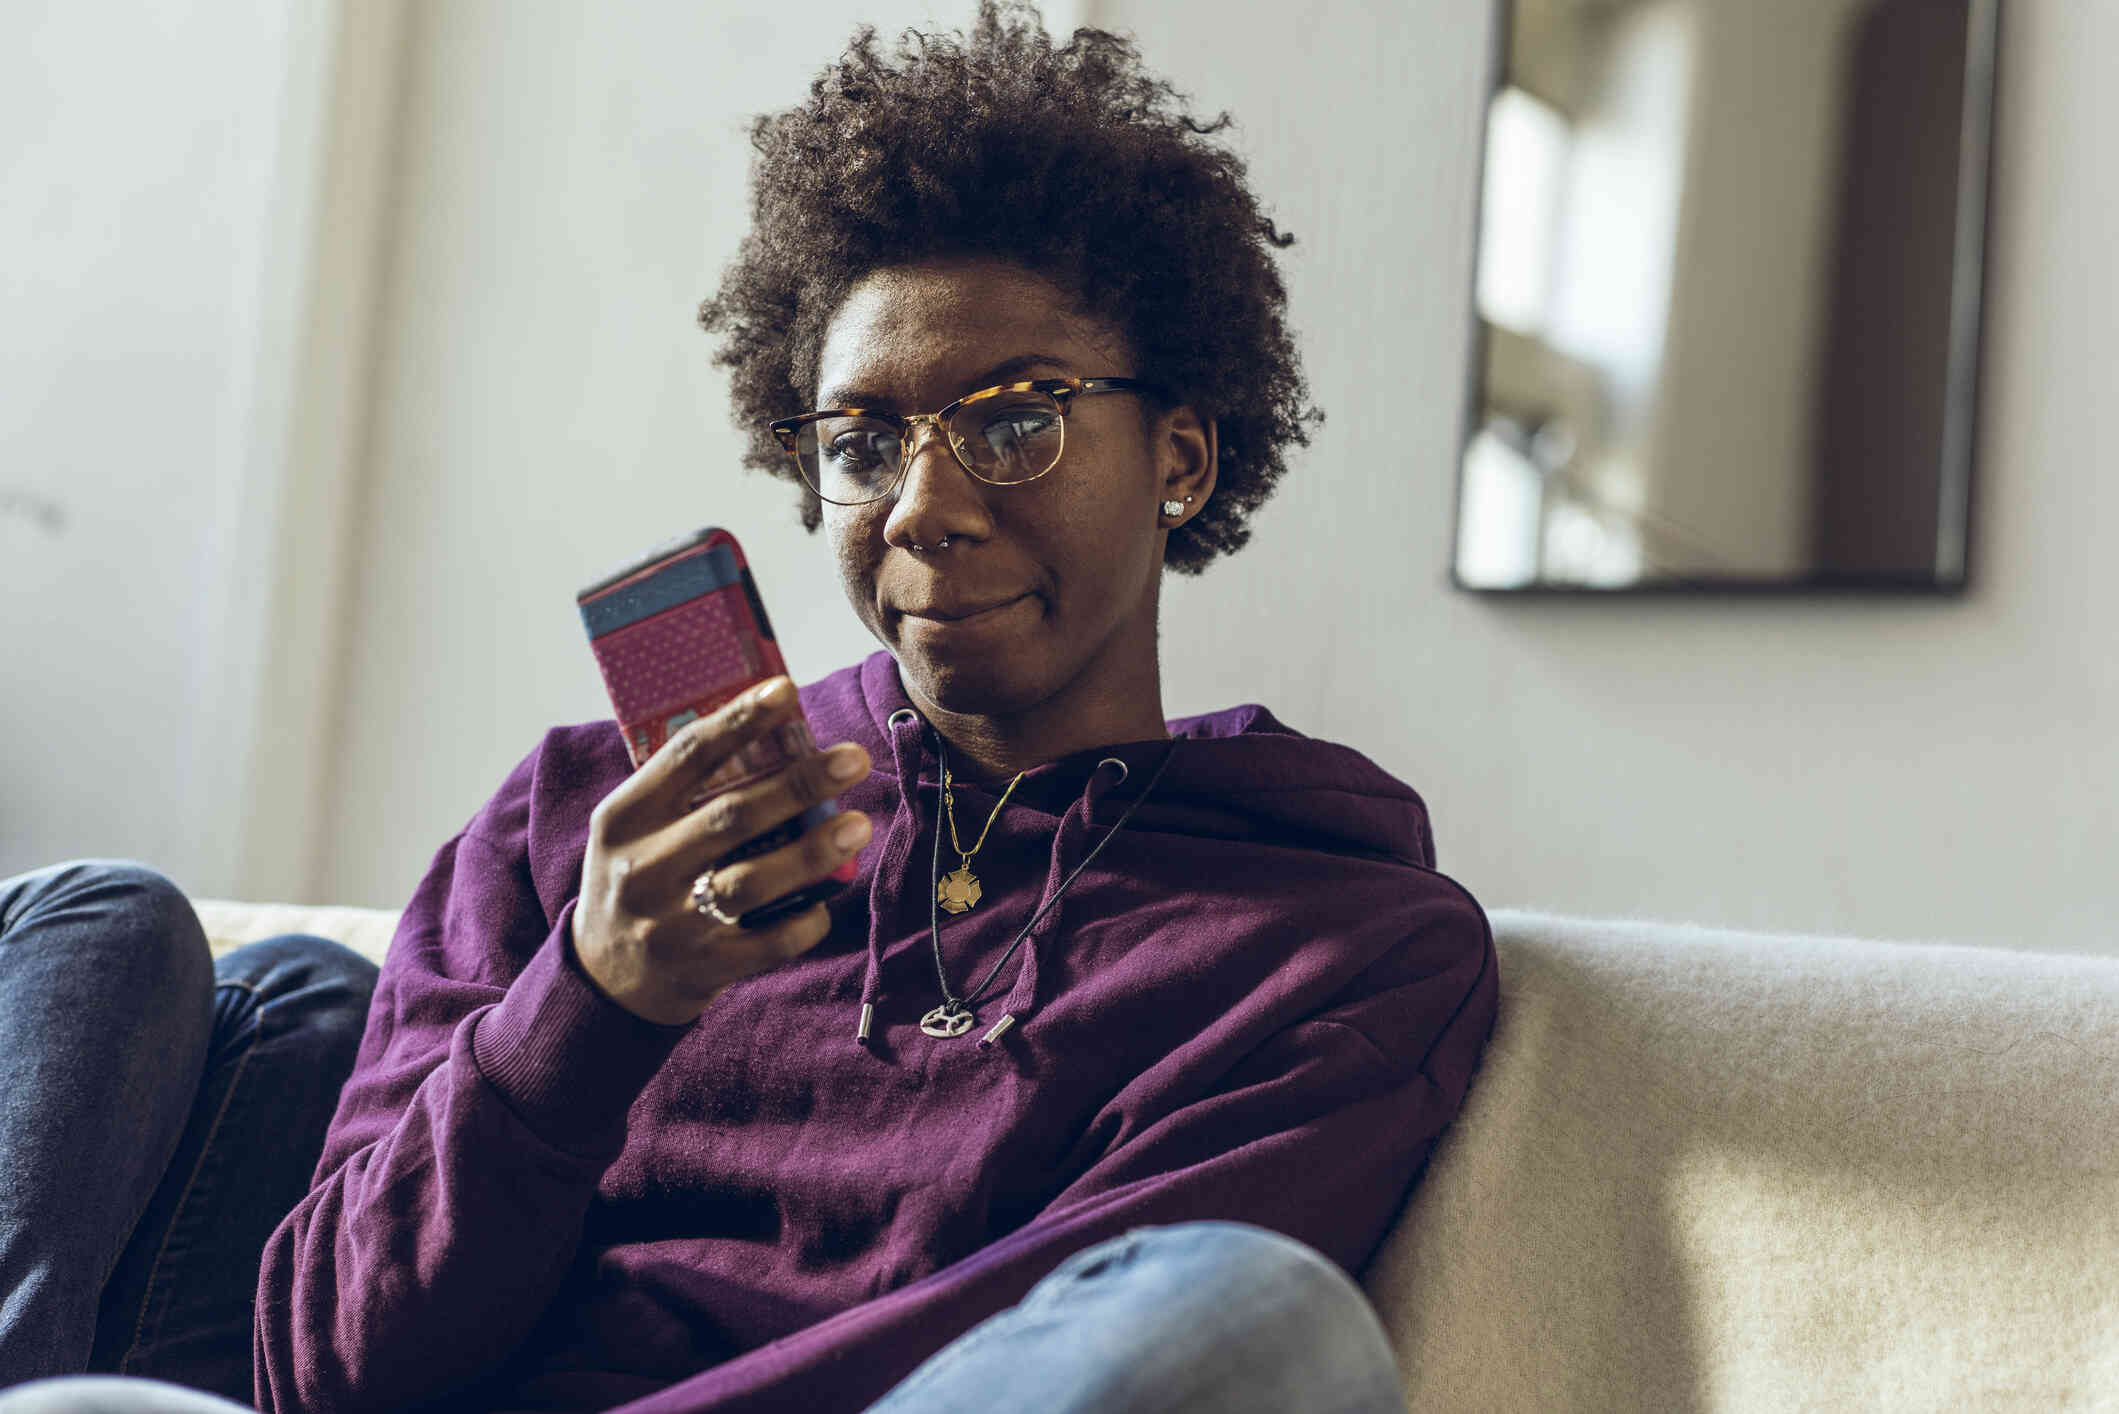 A woman in a purple hoodie sits on the couch and looks at the cellphone in her hand.